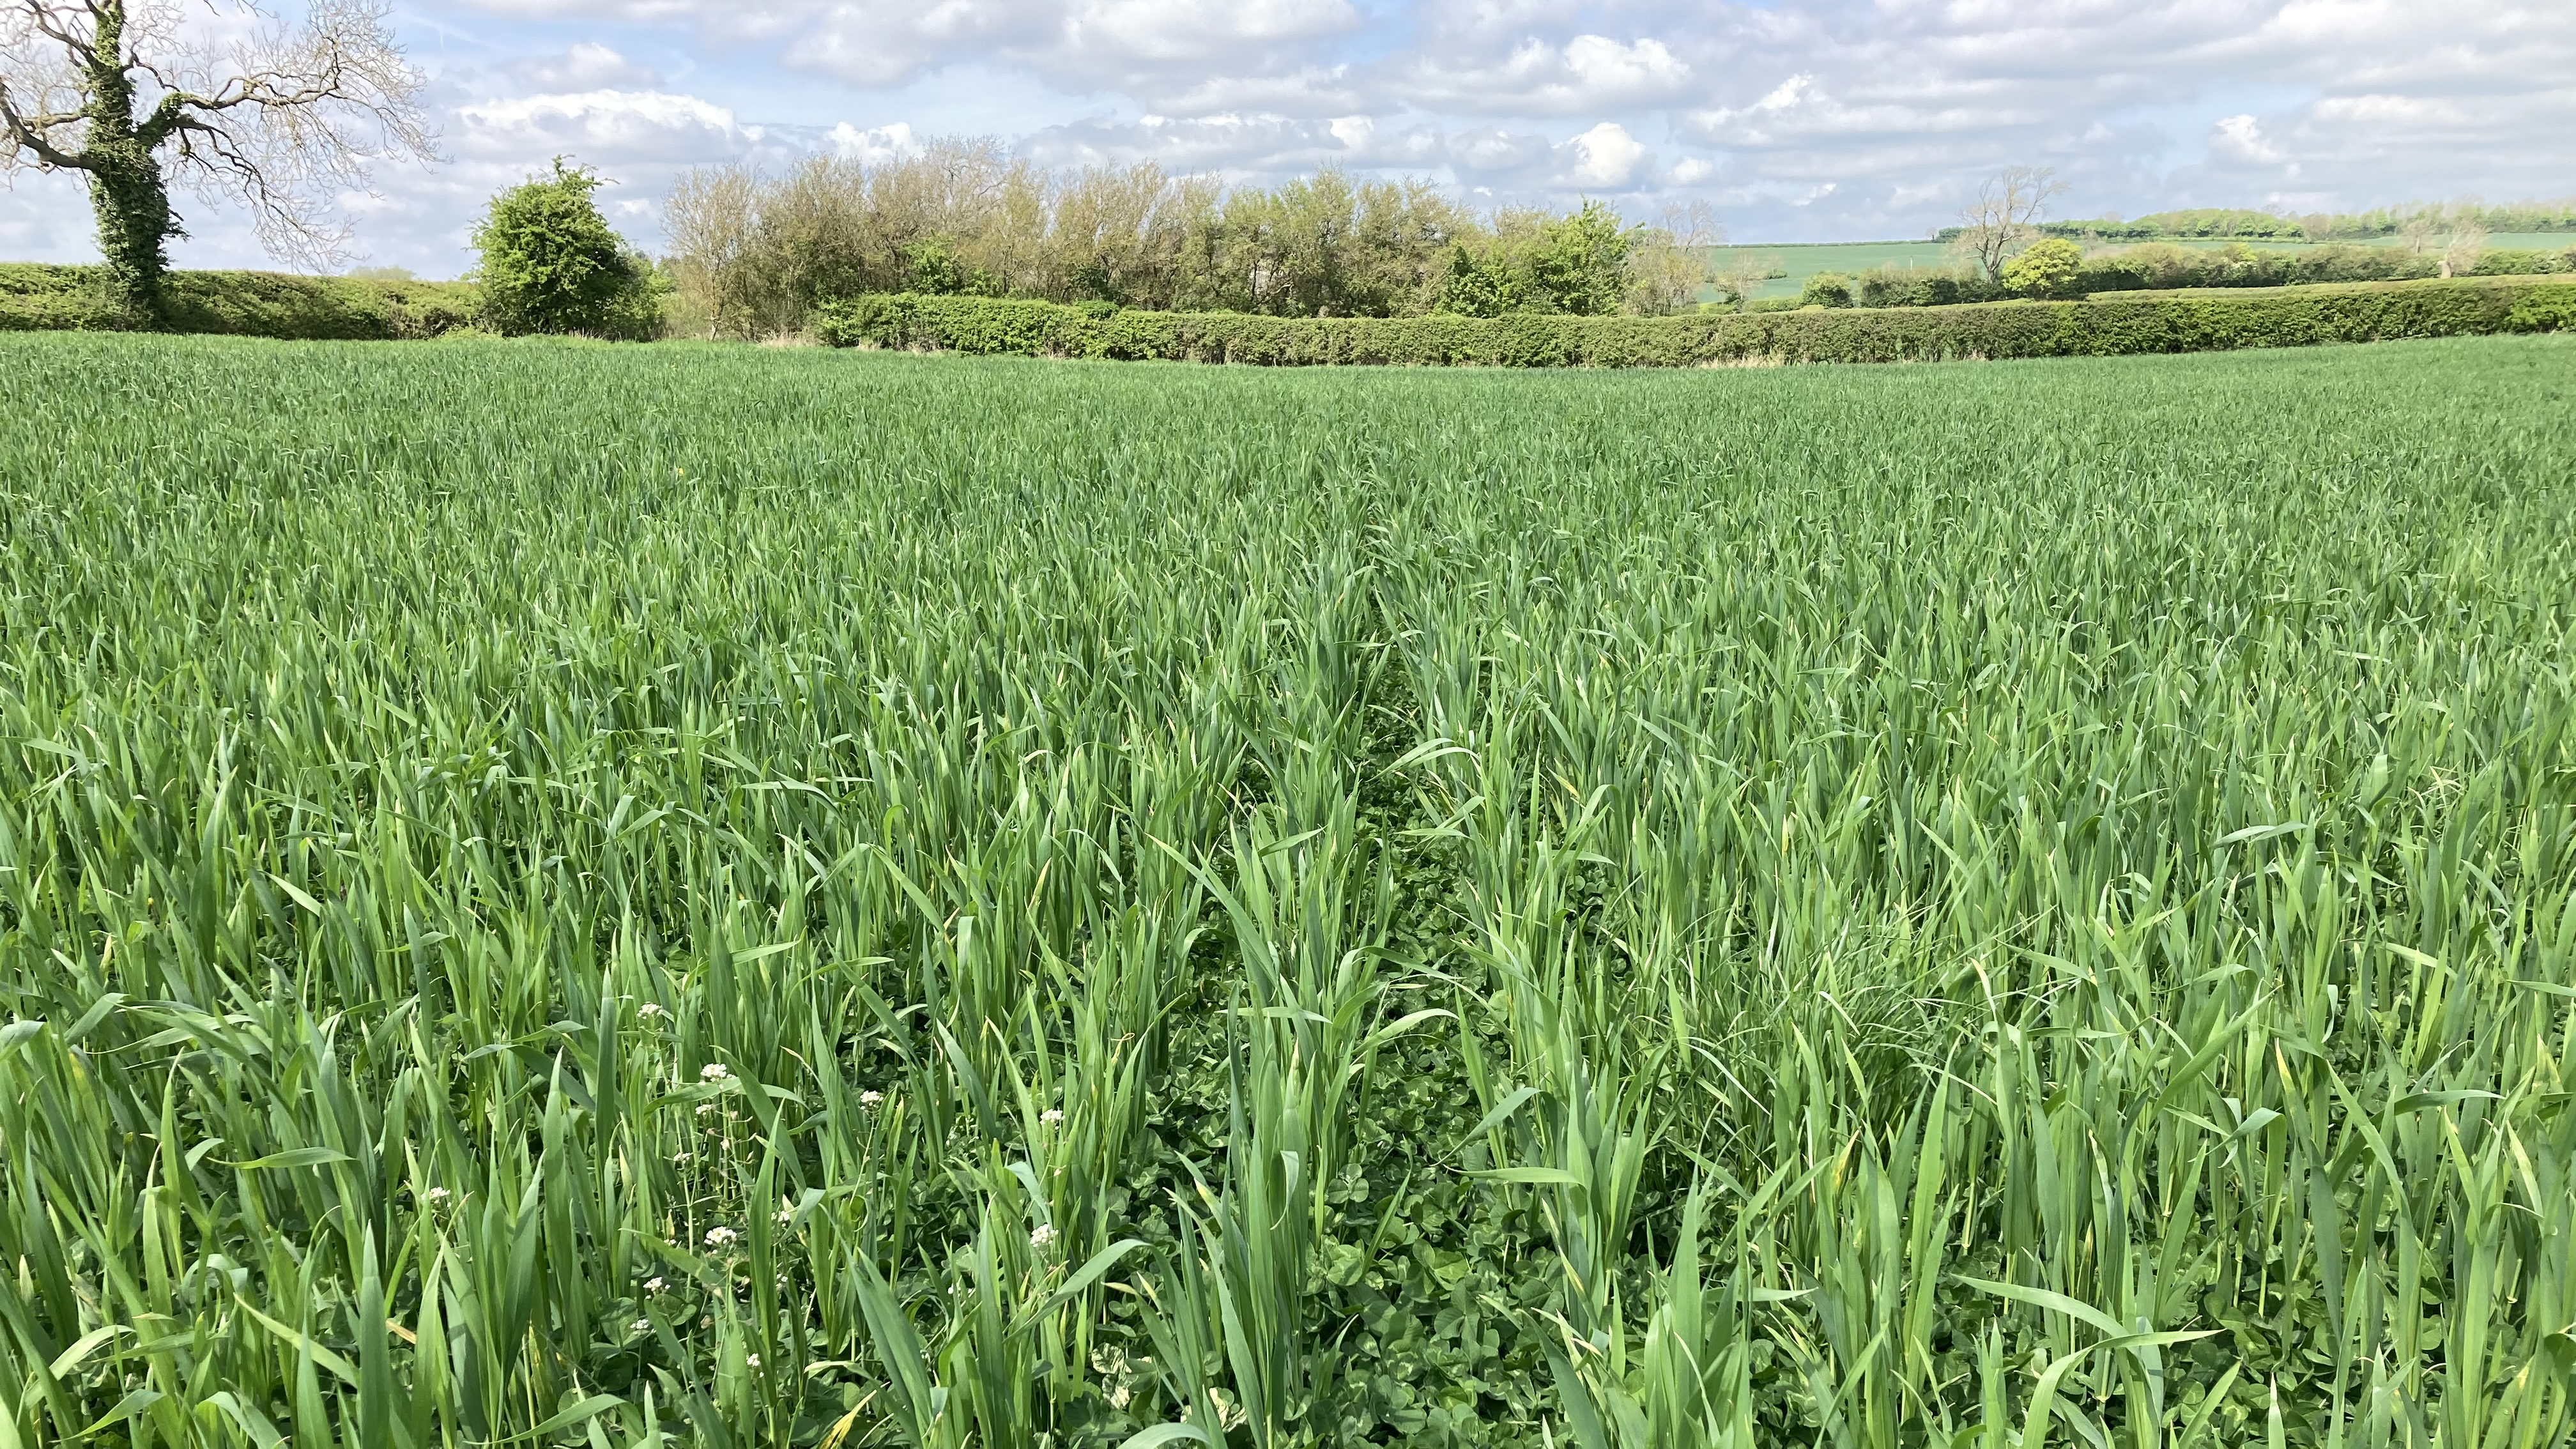 Wheat planted in clover field